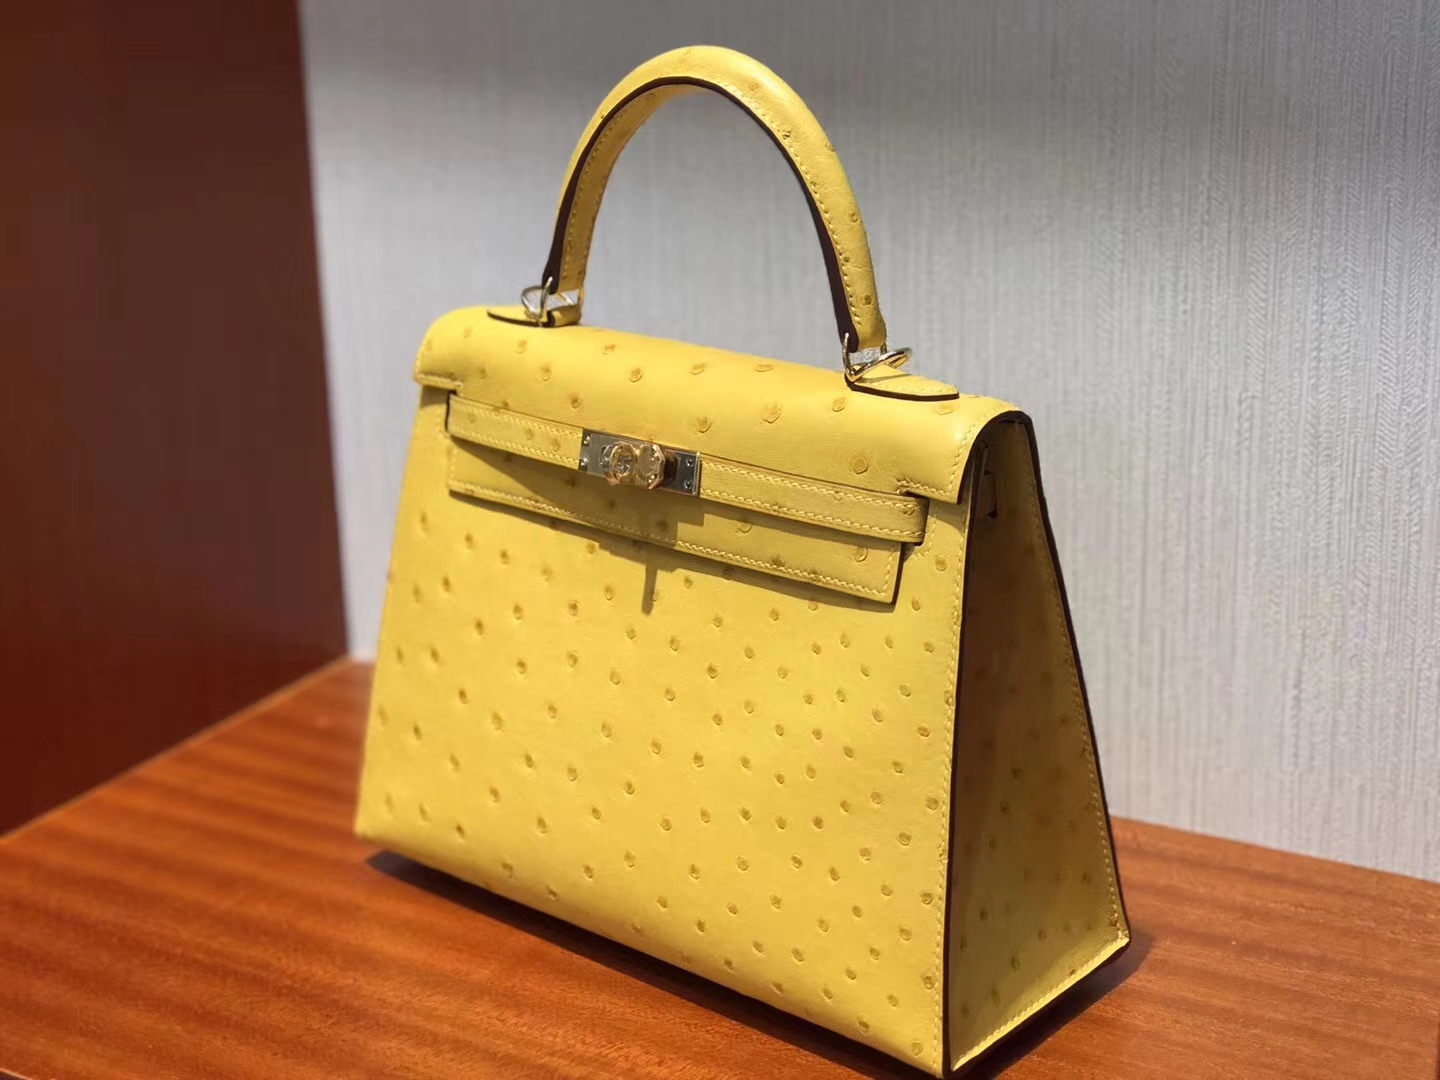 Fashion Ostrich Leather Kelly Bag25CM in 9D Ambre Yellow Gold Hardware